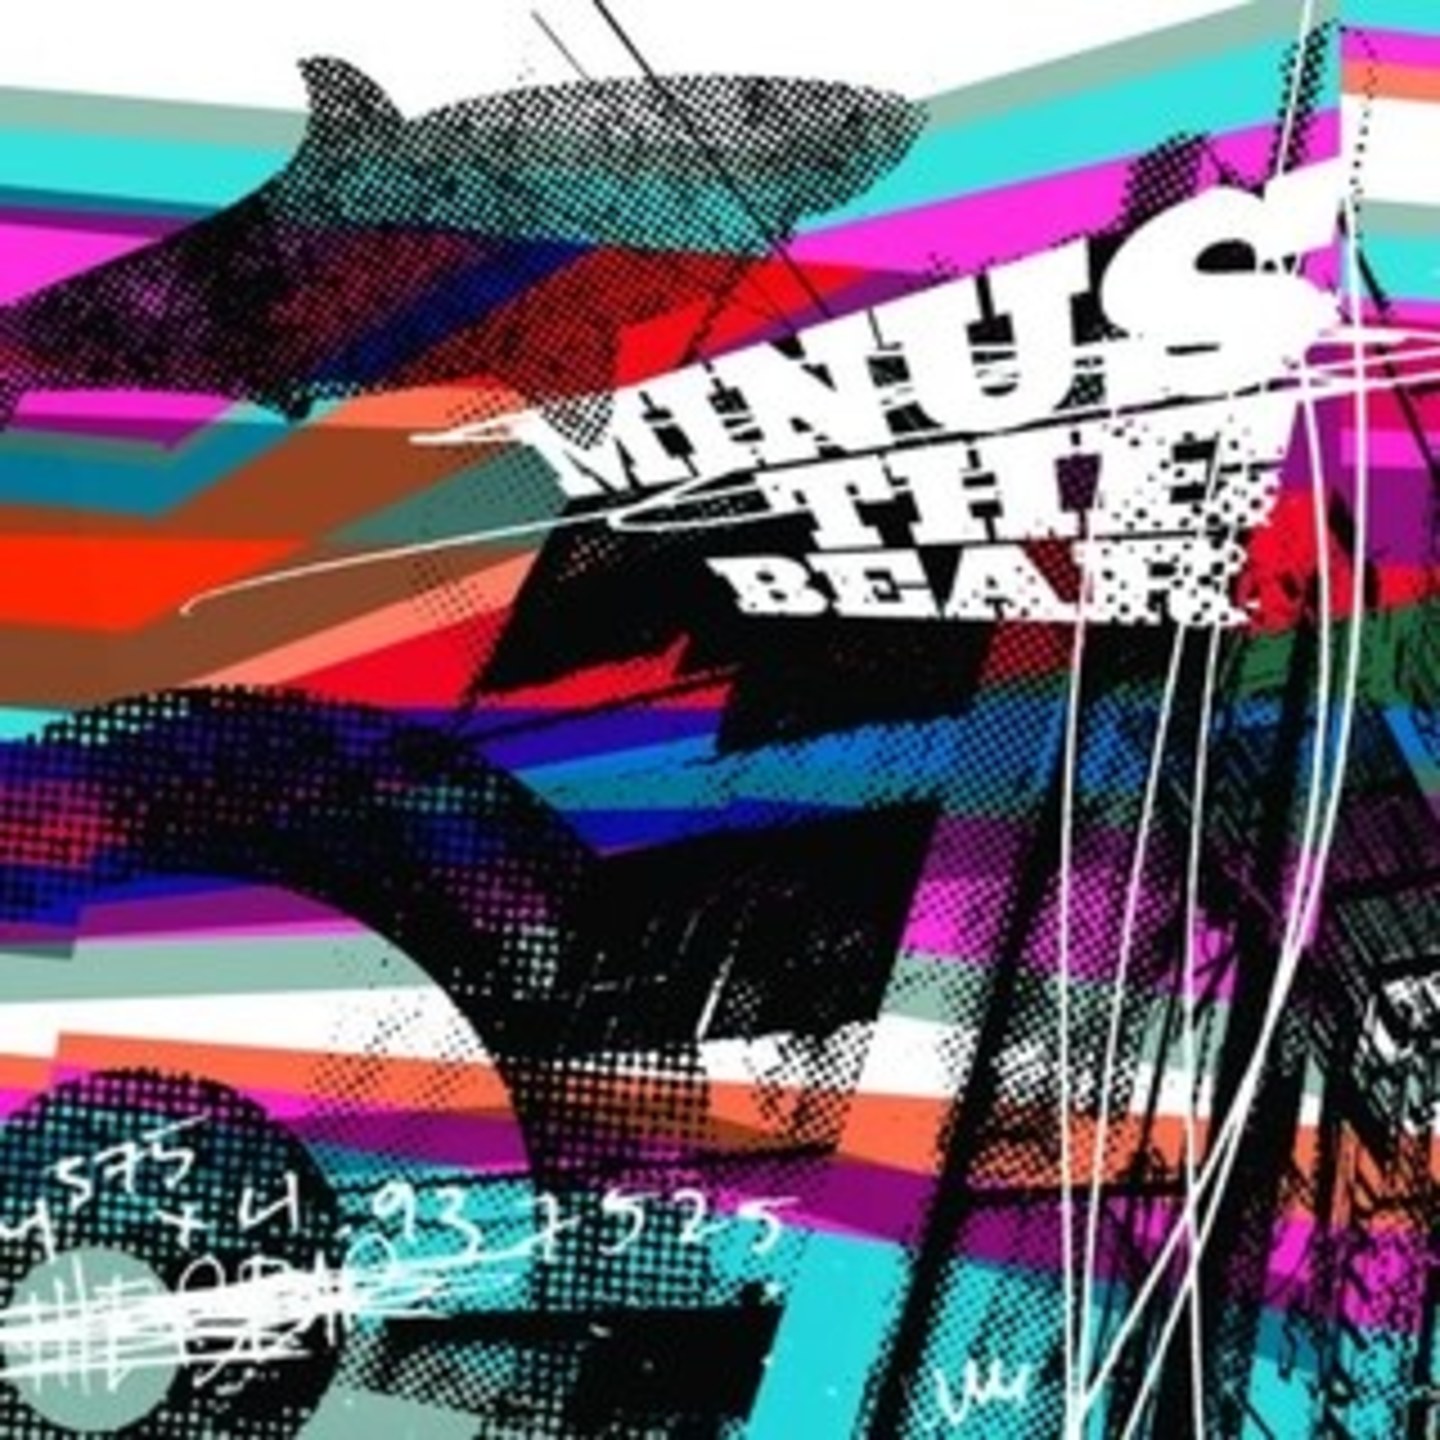 MINUS THE BEAR - They Make Beer Commercials Like This 12EP